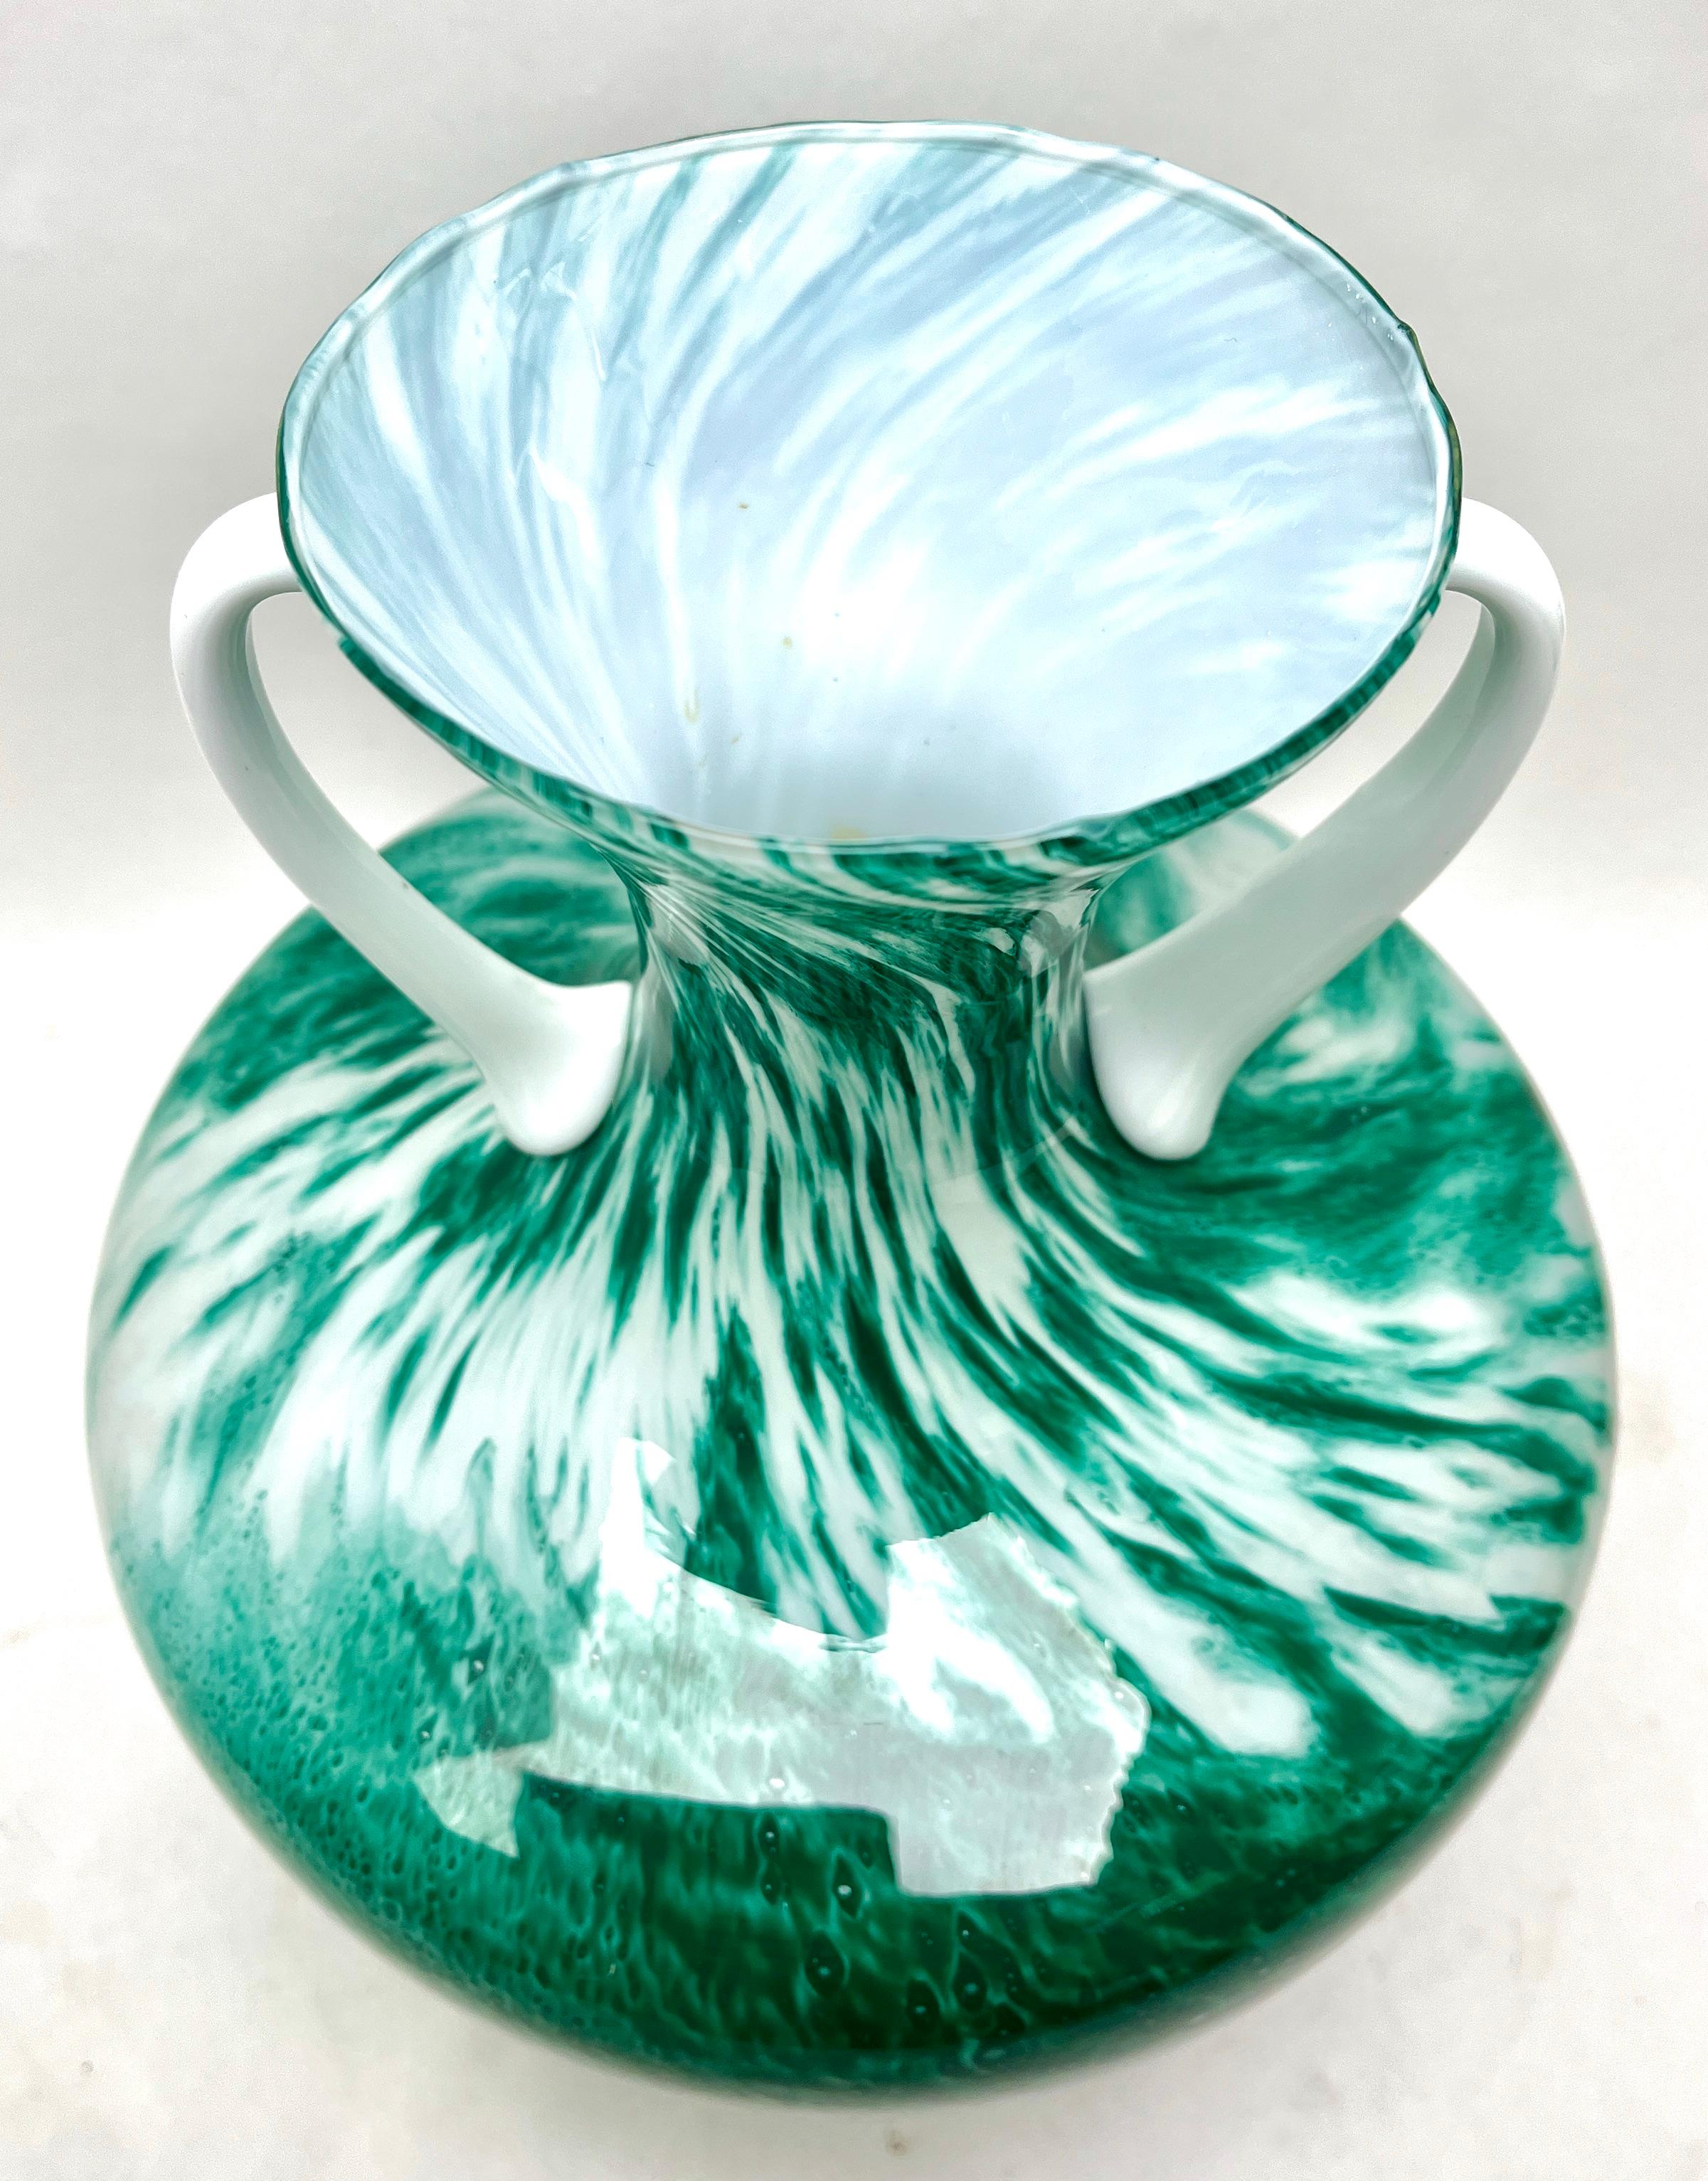 Opaline di Florence (Empoli) opalescent green and Whit Italian Art glass Pitcher 
Beautiful hand blown opal (green, brown) and hand-applied white handles. 
Measures: 27 cm tall.
The piece is in excellent condition and a real beauty!



